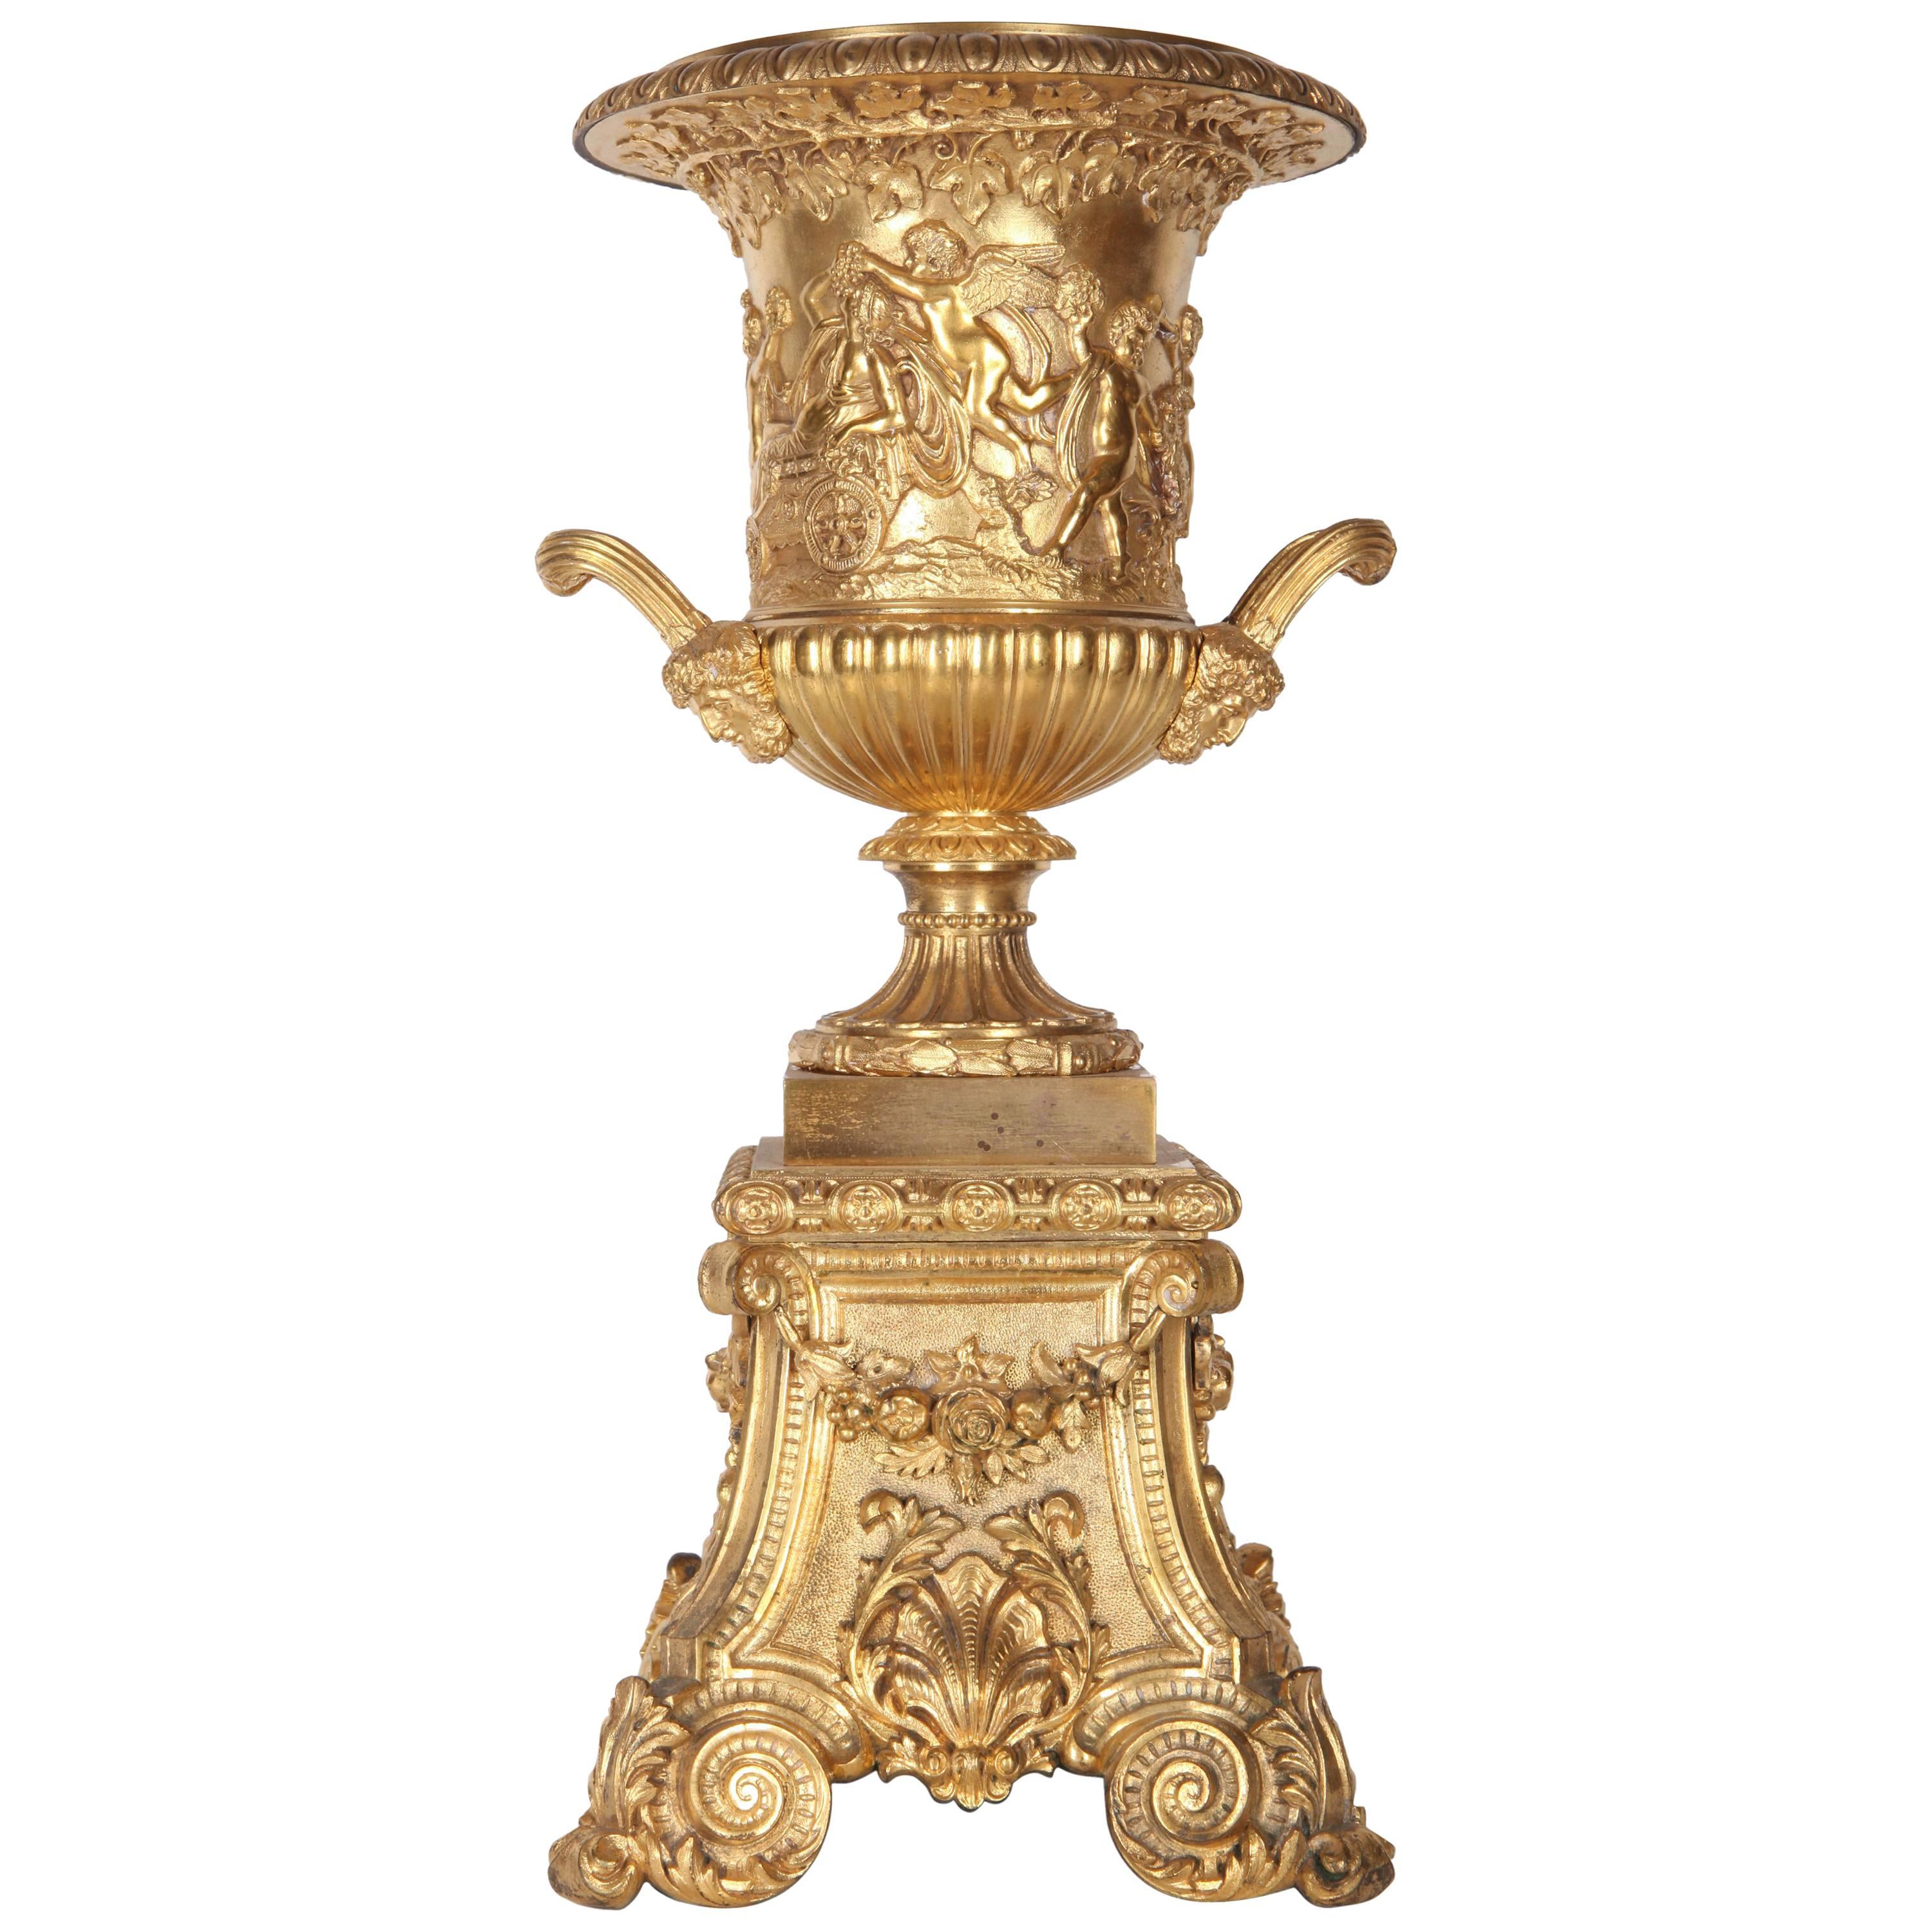 19th French Century Gilt Bronze Centerpiece Vase After the Antique For Sale